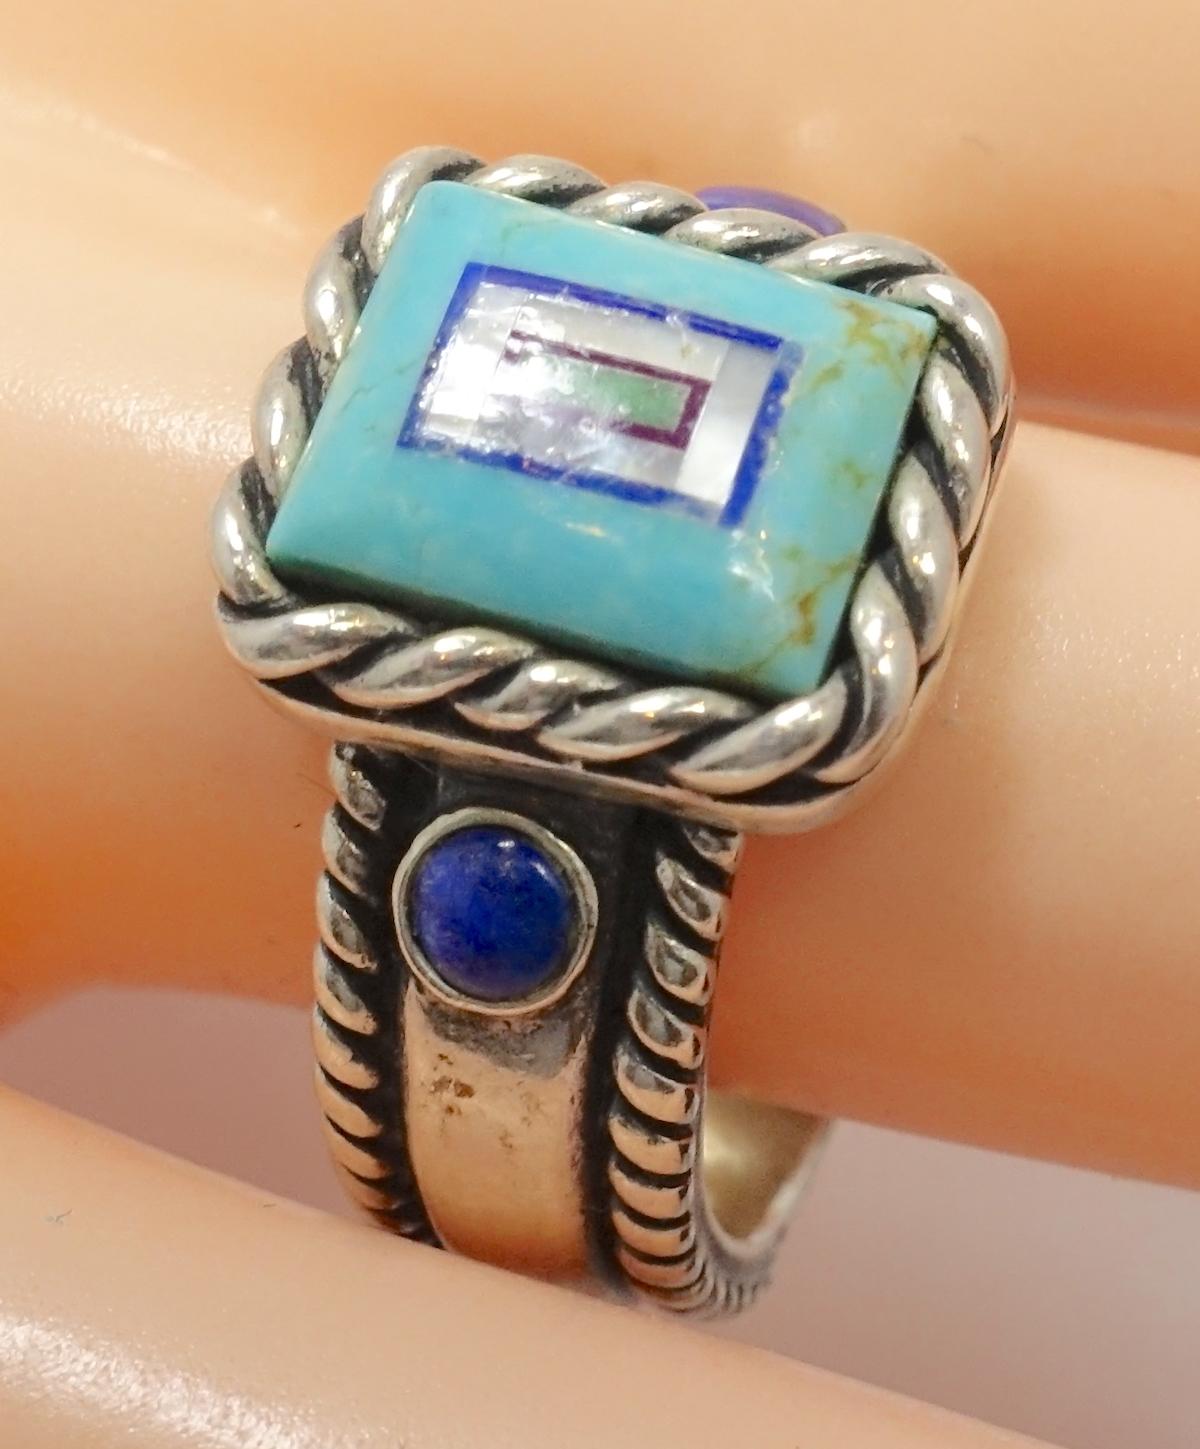 This vintage signed CQS ring features turquoise, lapis and mother of pearl in a sterling silver setting.  A size 9, this ring measures ½ at the top, is signed “CQS Sterl” and is in excellent condition.